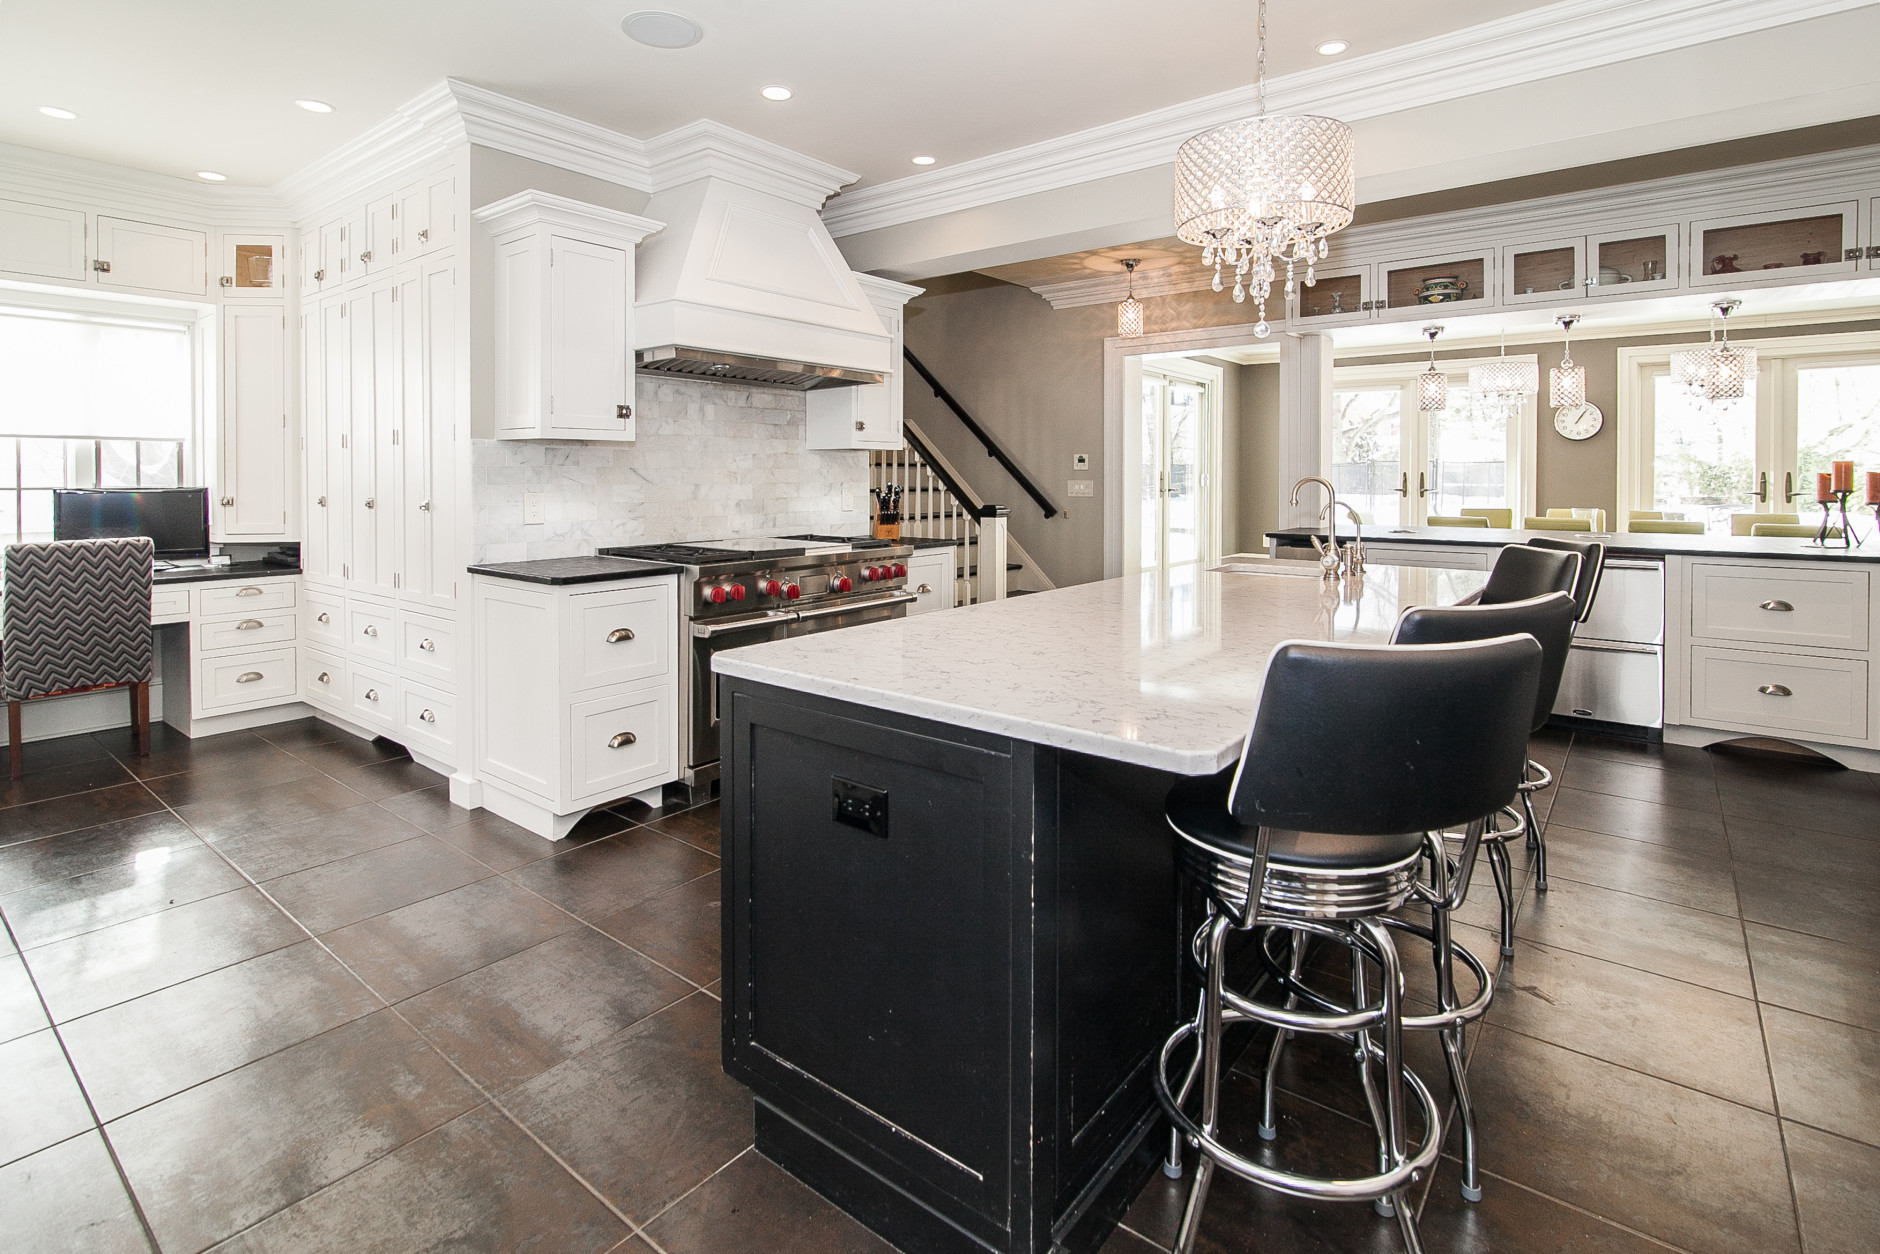 The house has a gourmet eat-in kitchen with a breakfast area. (Genelle Brown/TopTenRealEstate)